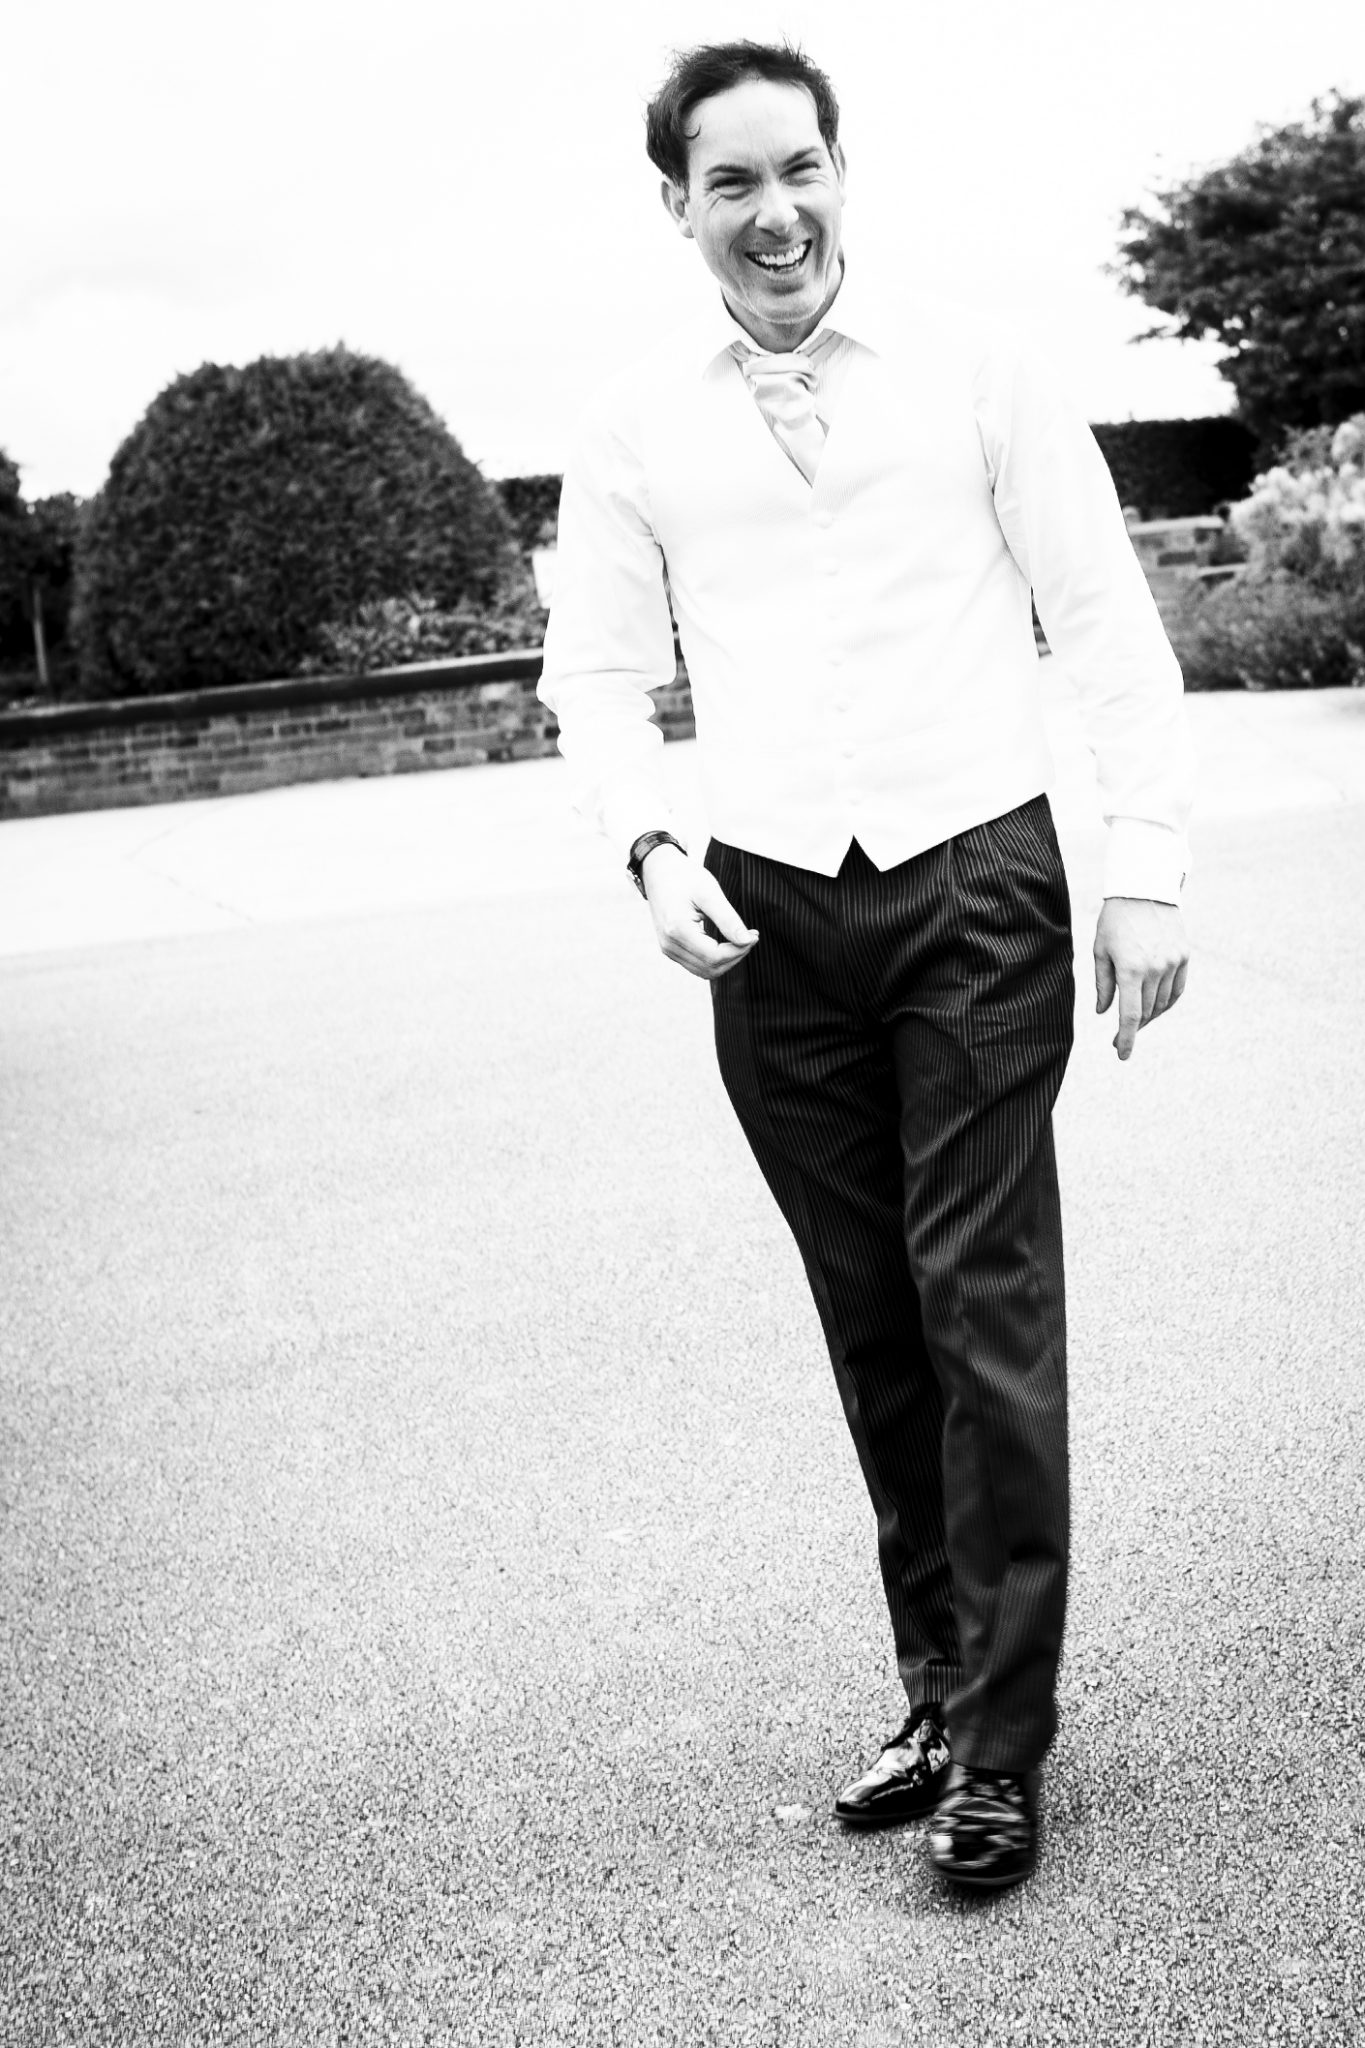 wedding-photography-of-the-groom-before-the-ceremony-at-Sandhole-Oak-Barn-Congleton-Cheshire